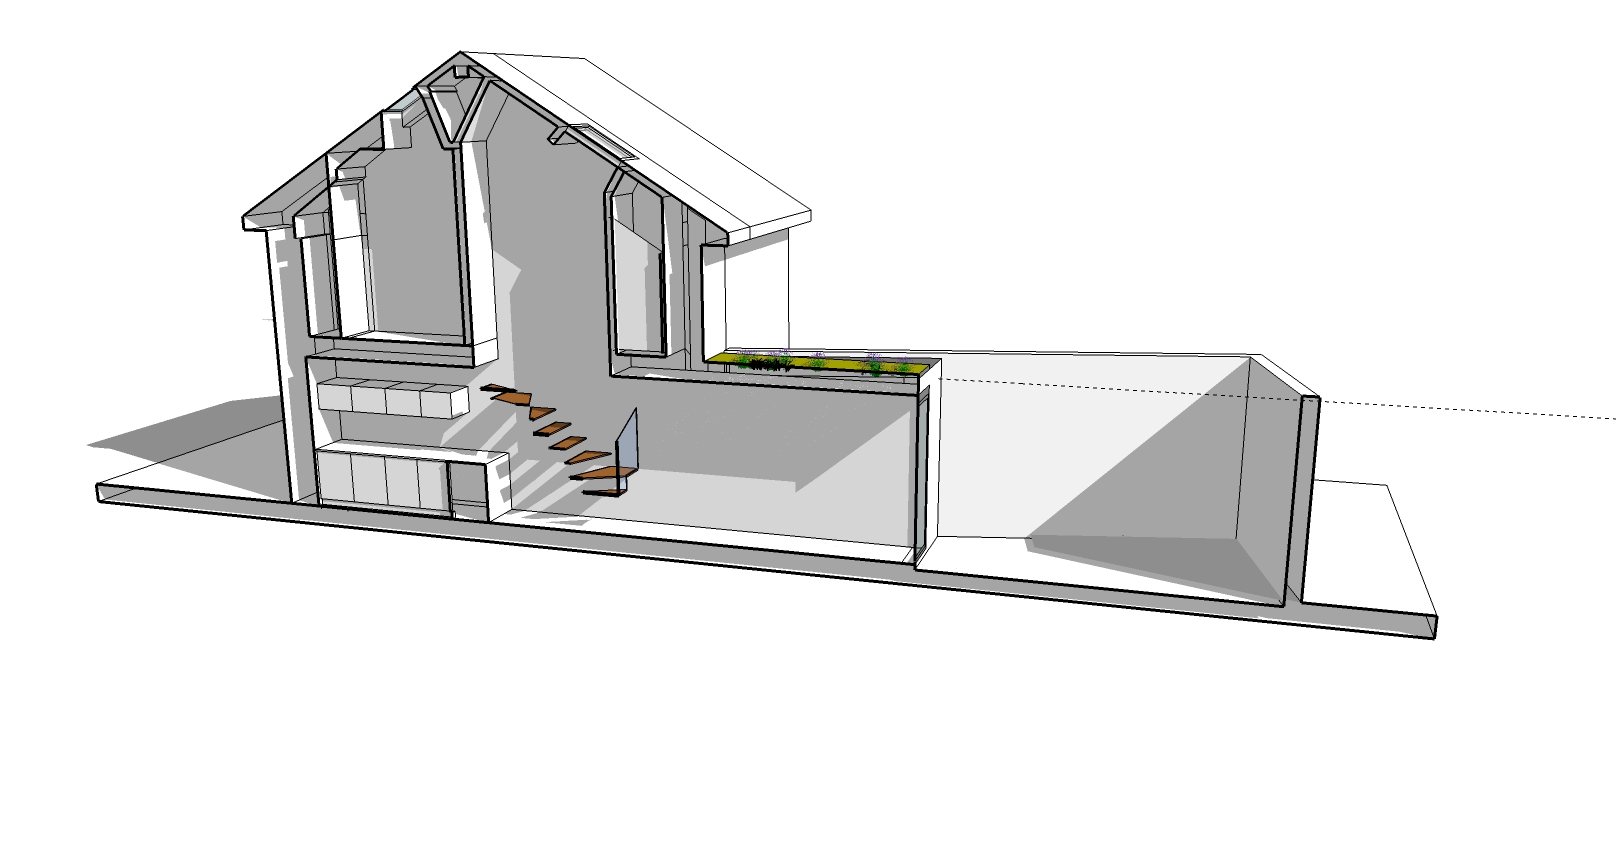 Section cut through a 3d model of a residential project